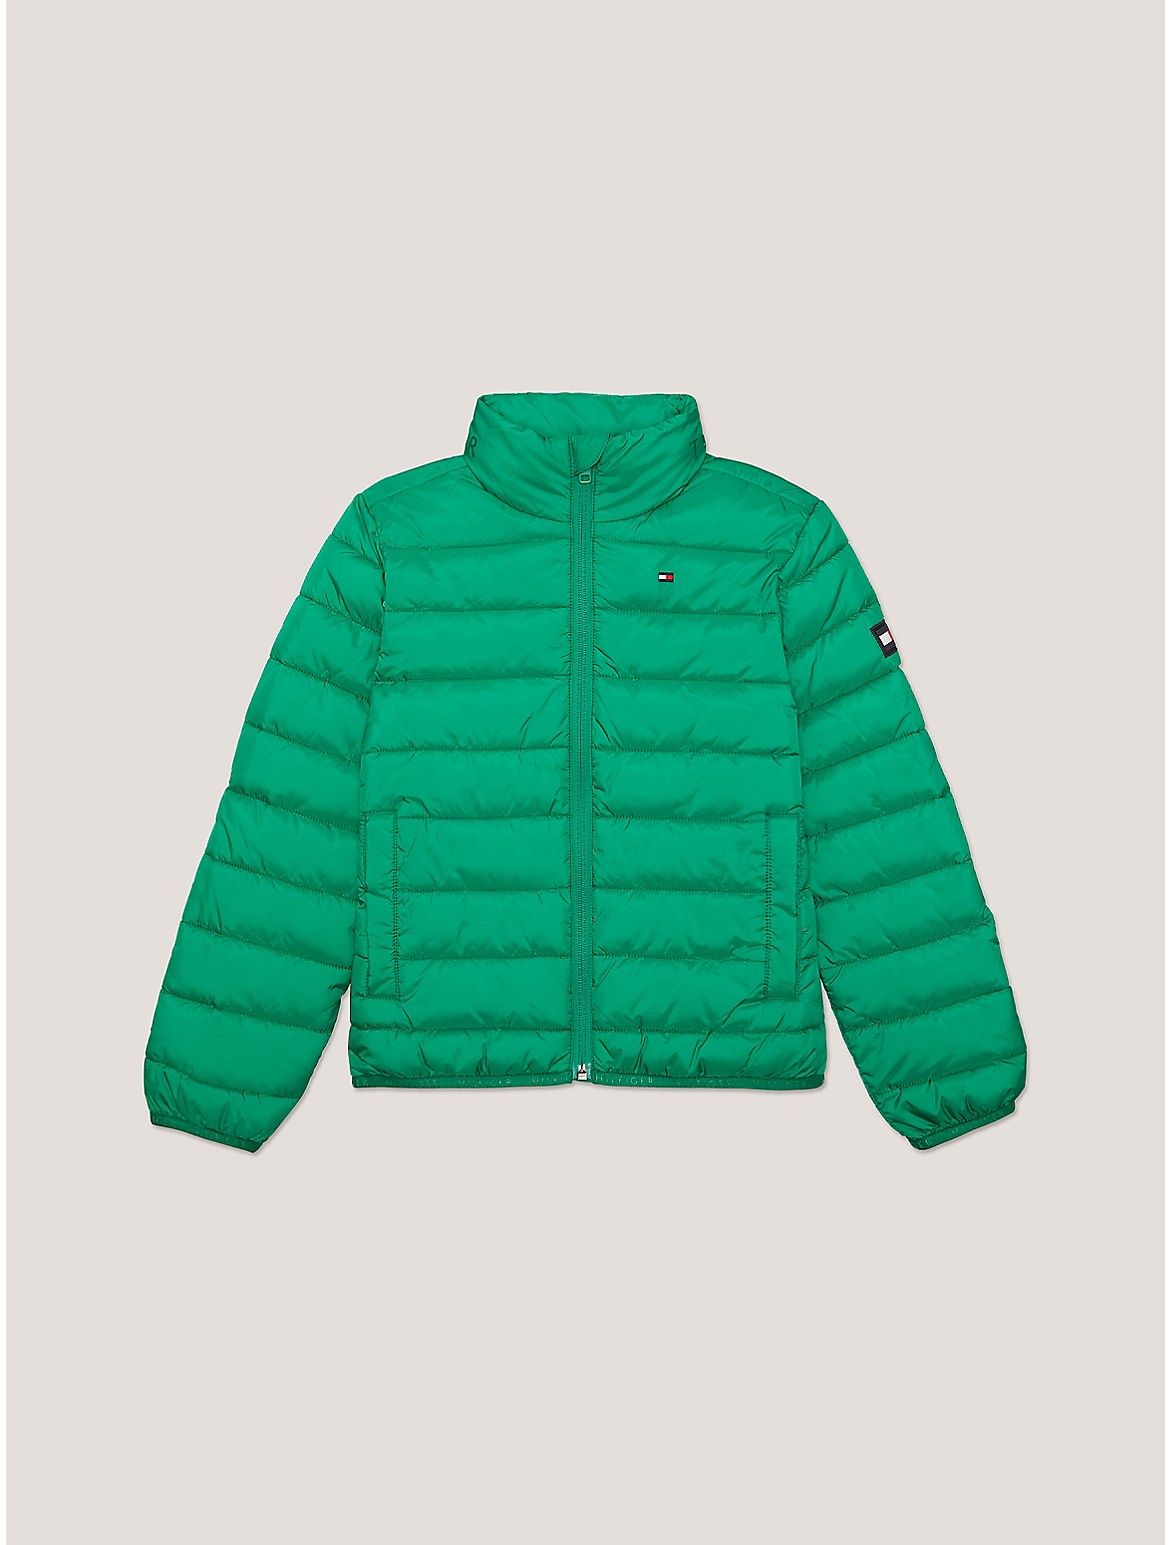 Tommy Hilfiger Boys' Kids' Insulated Jacket - Green - XS